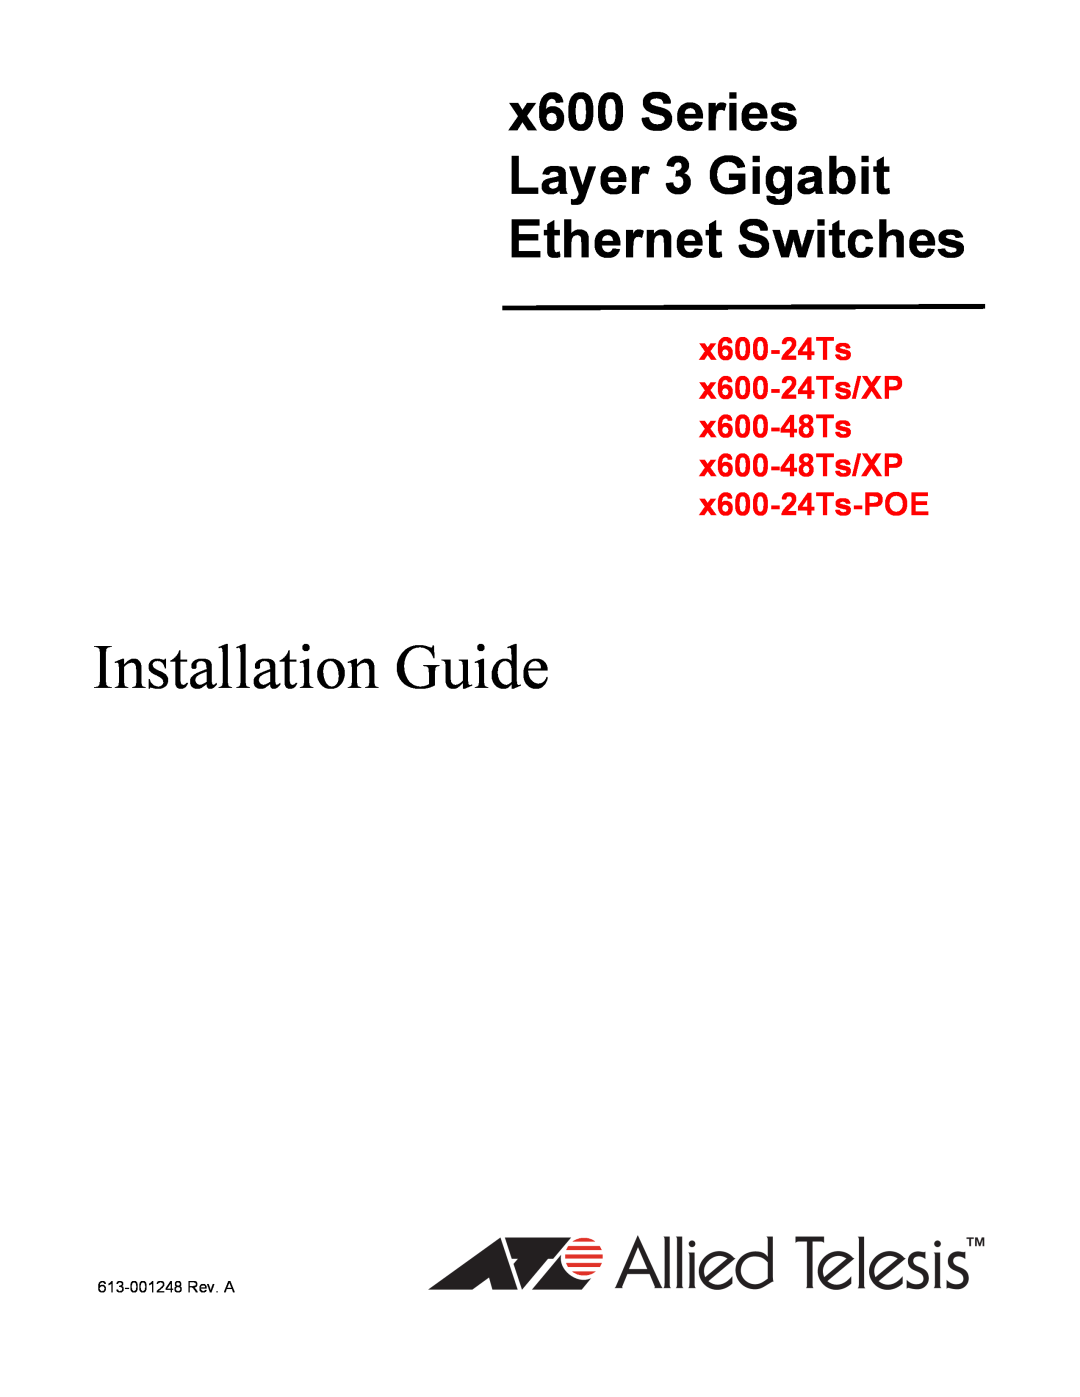 Allied Telesis x600-24Ts-POE manual Installation Guide, x600 Series Layer 3 Gigabit Ethernet Switches 